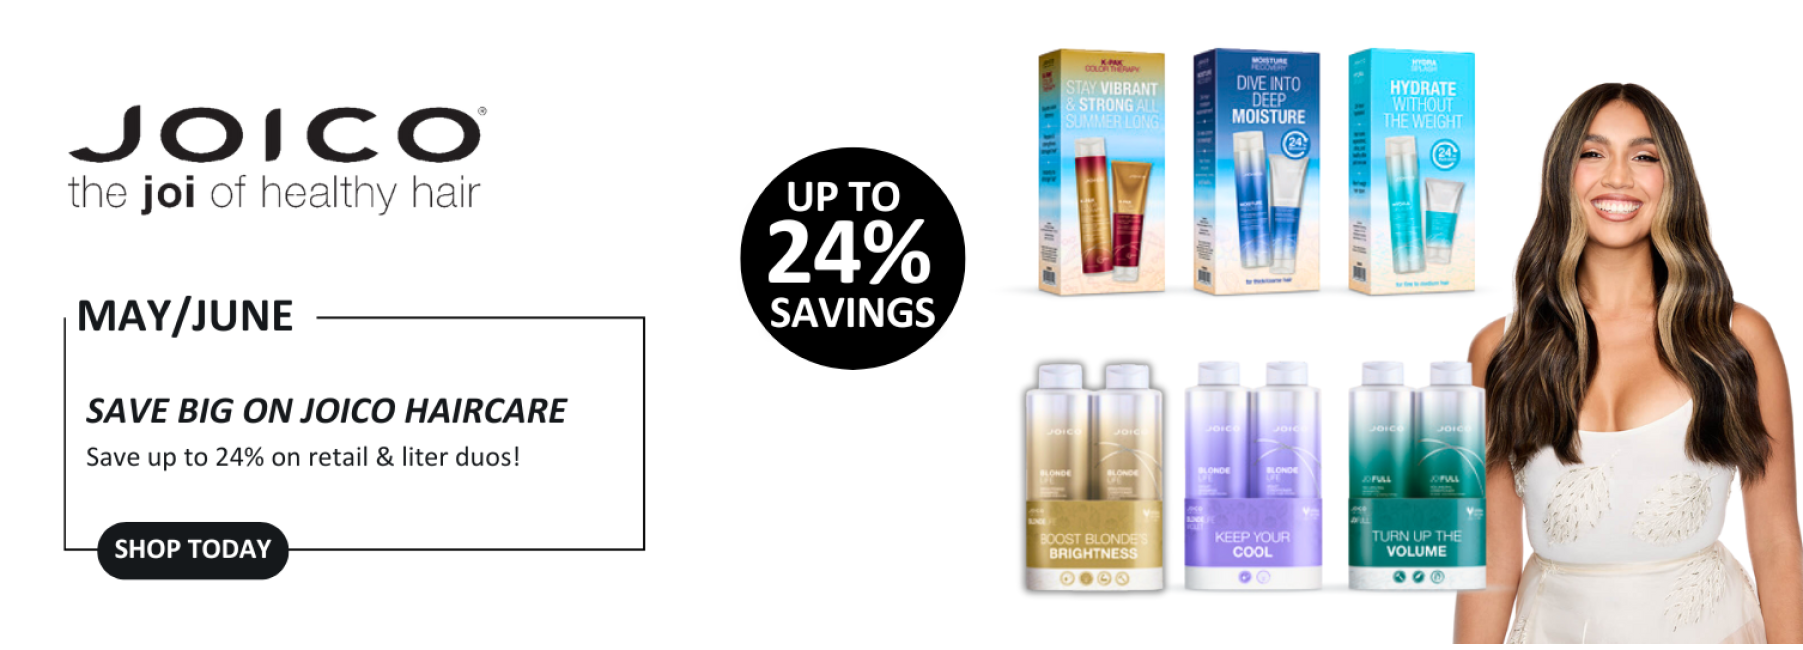 JOICO RETAIL AND LITER DUO OFFERS MAY